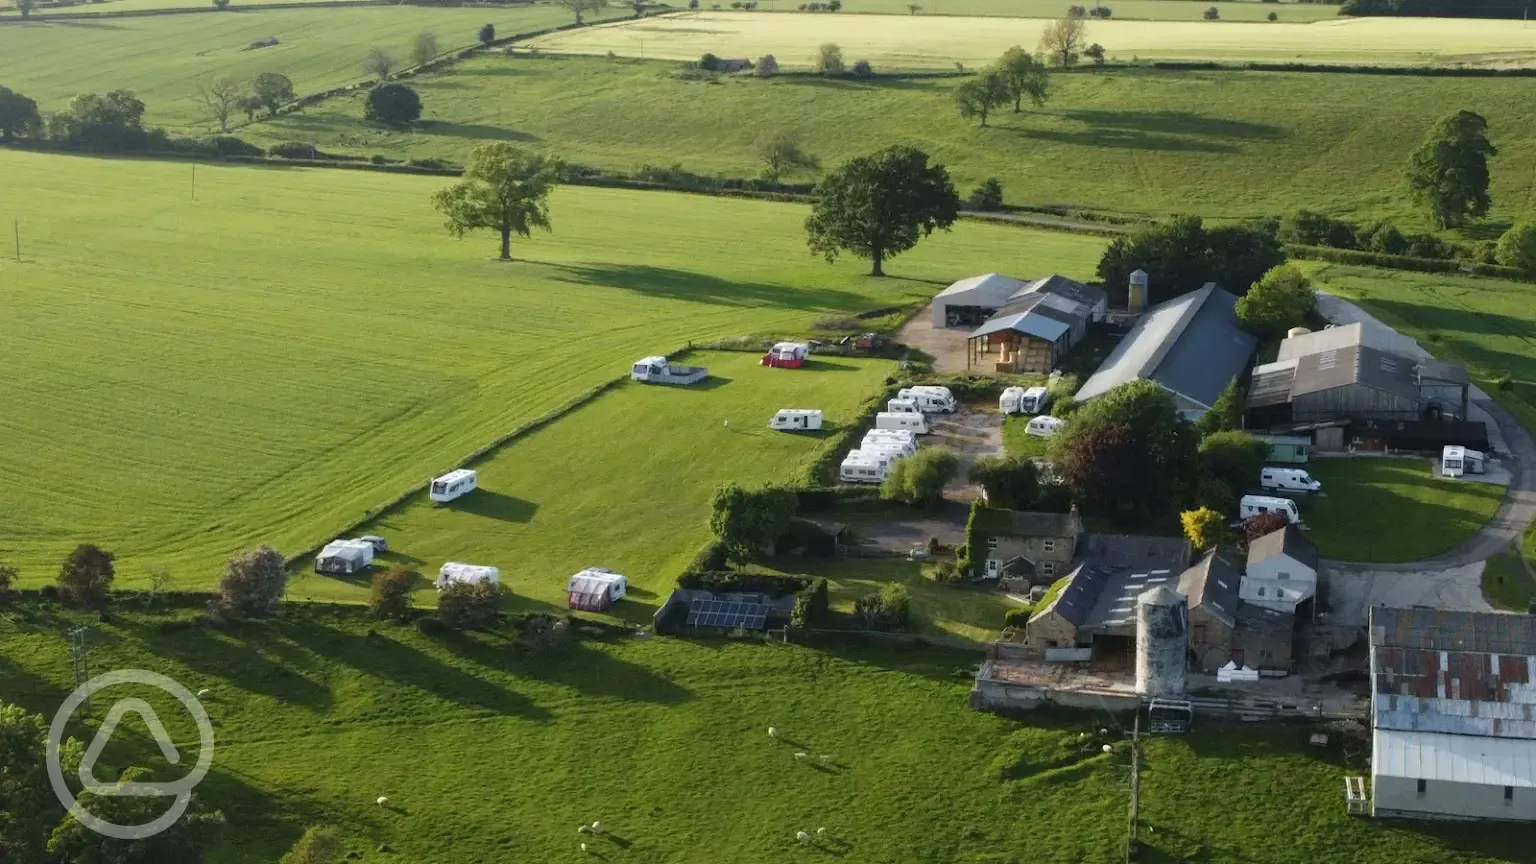 Aerial view of campsite and farm